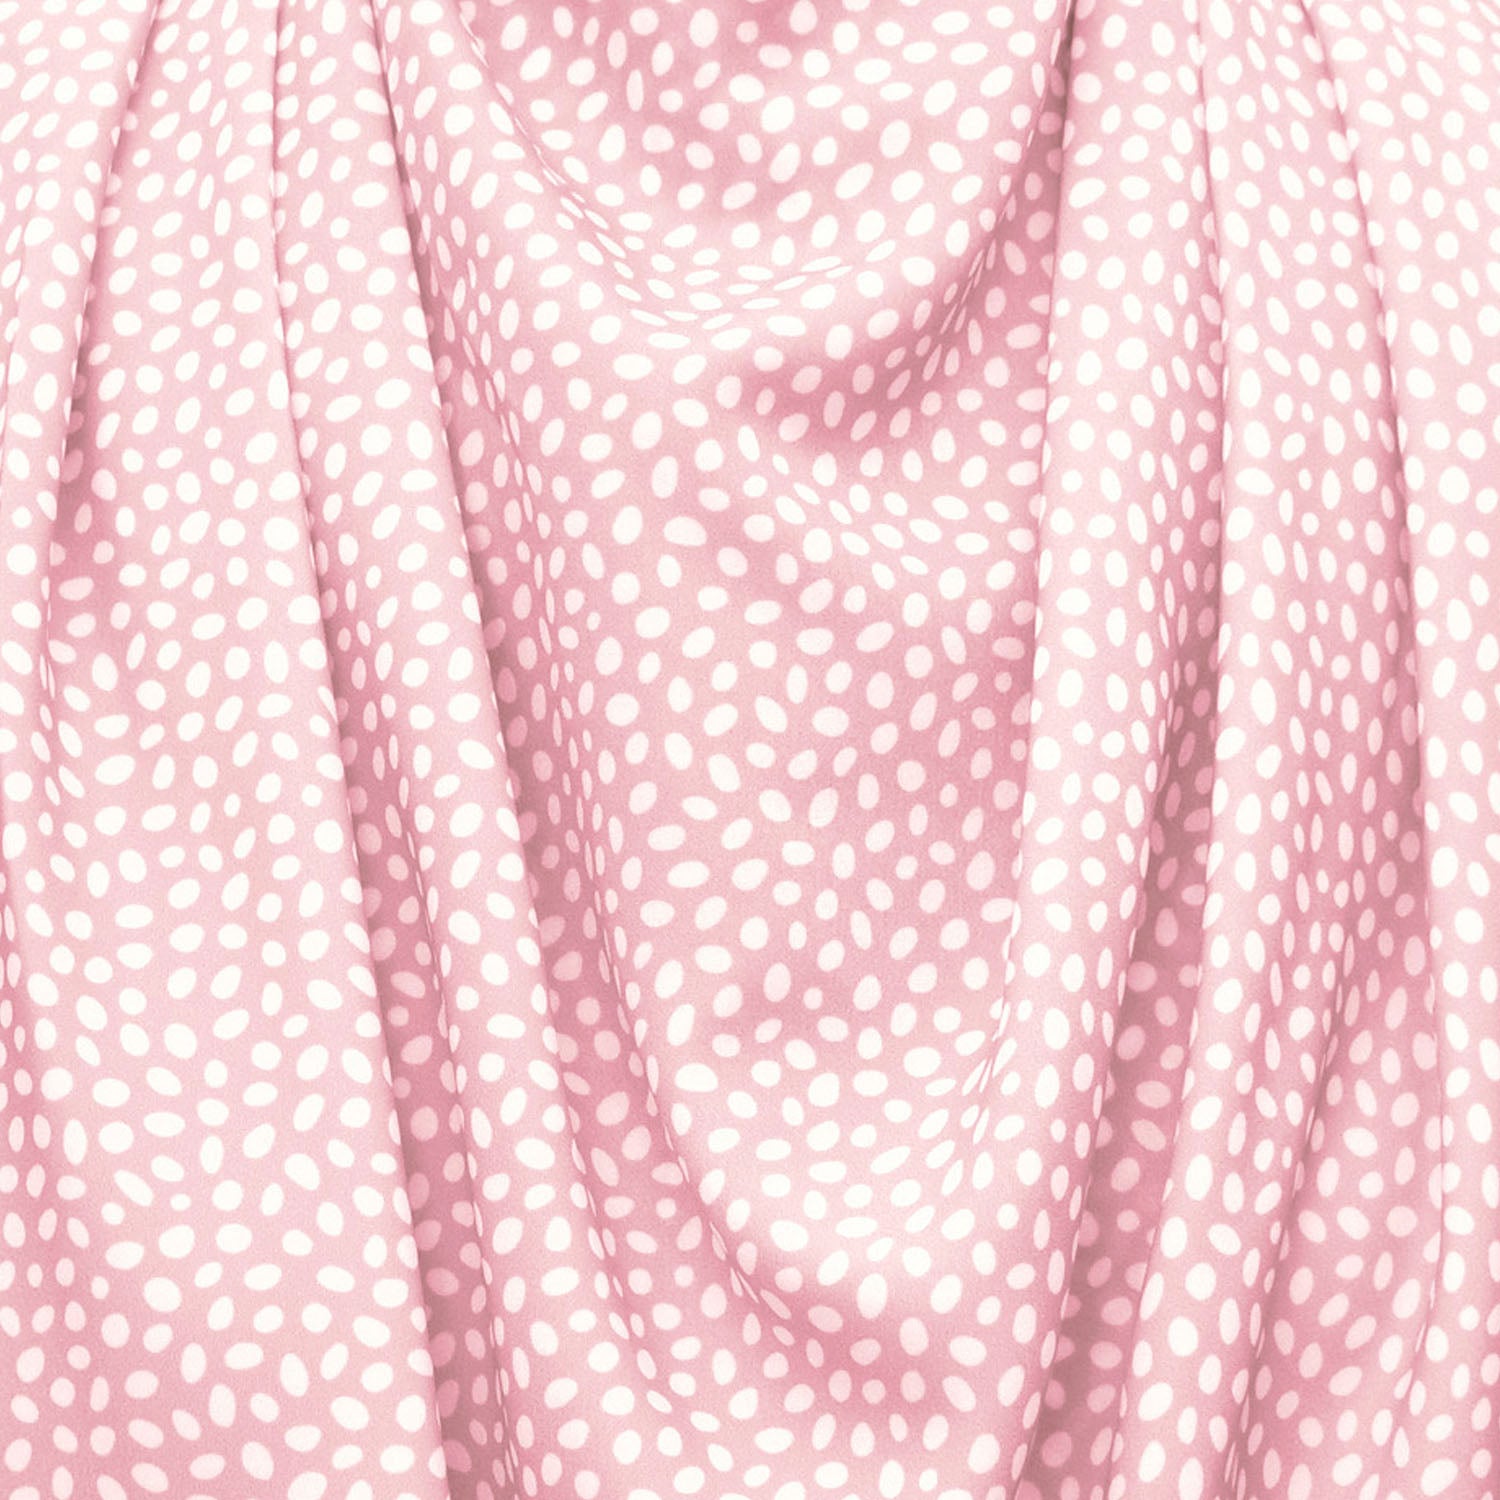 Pashmina scarf style clothing protector - Pink Dots | Care Designs